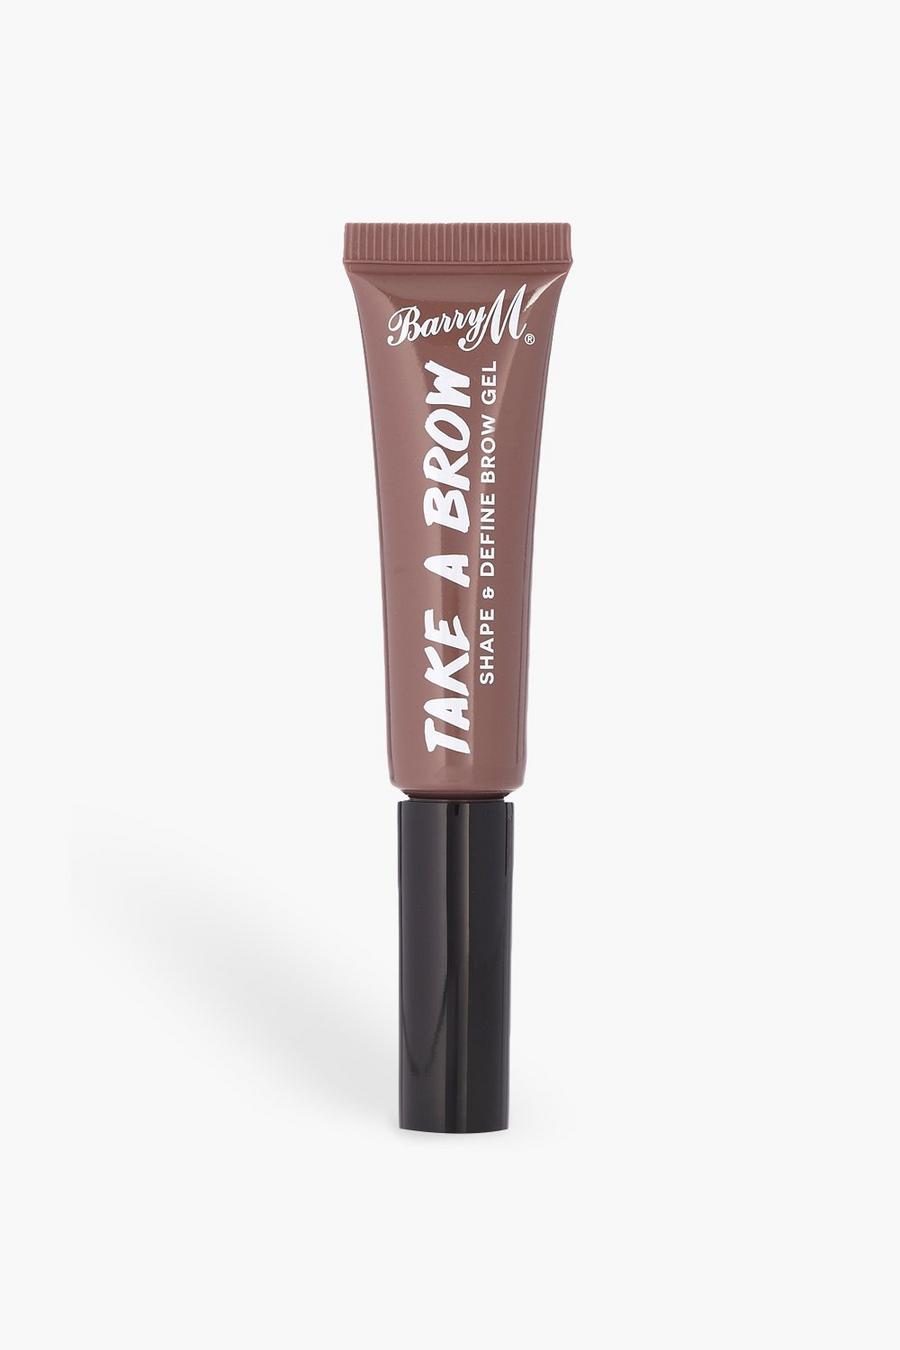 Barry M Take A Brow Augenbrauengel, Braun marron image number 1